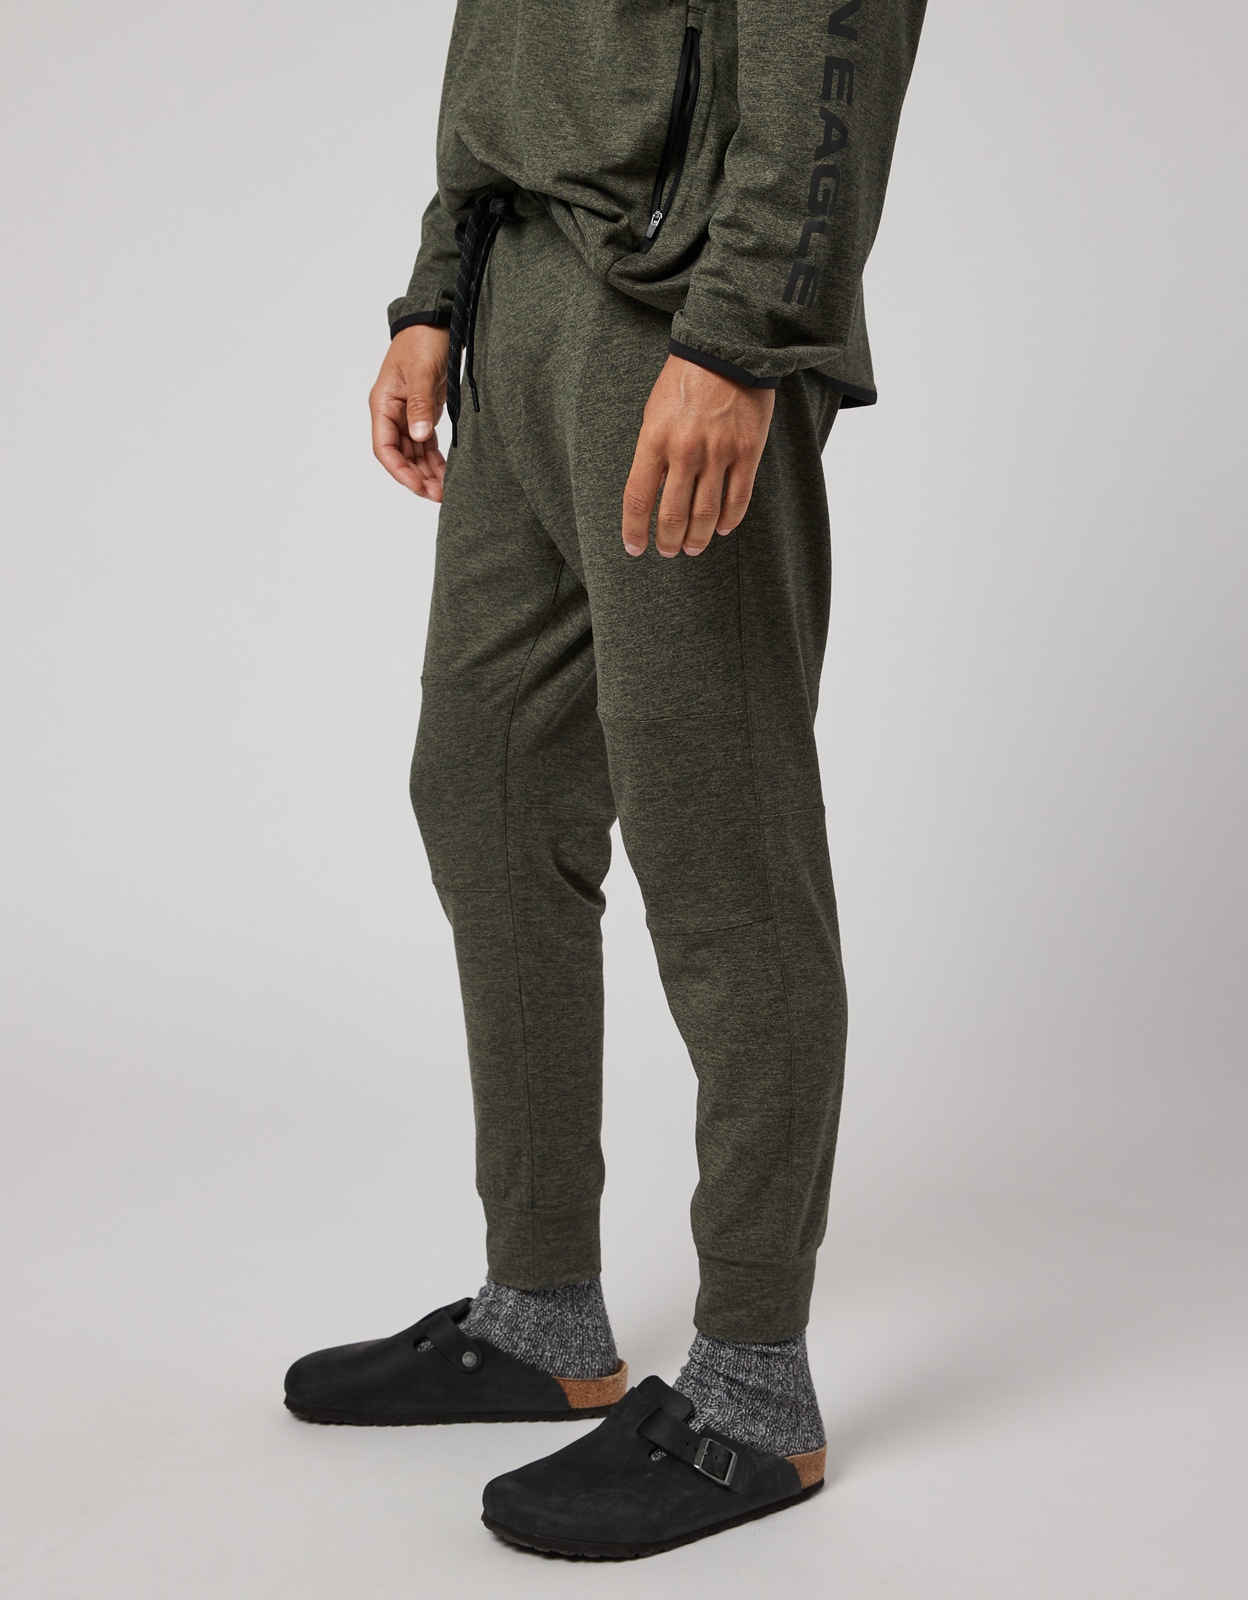 American Eagle Outfitters O Active Flex Jogger Pants, $49